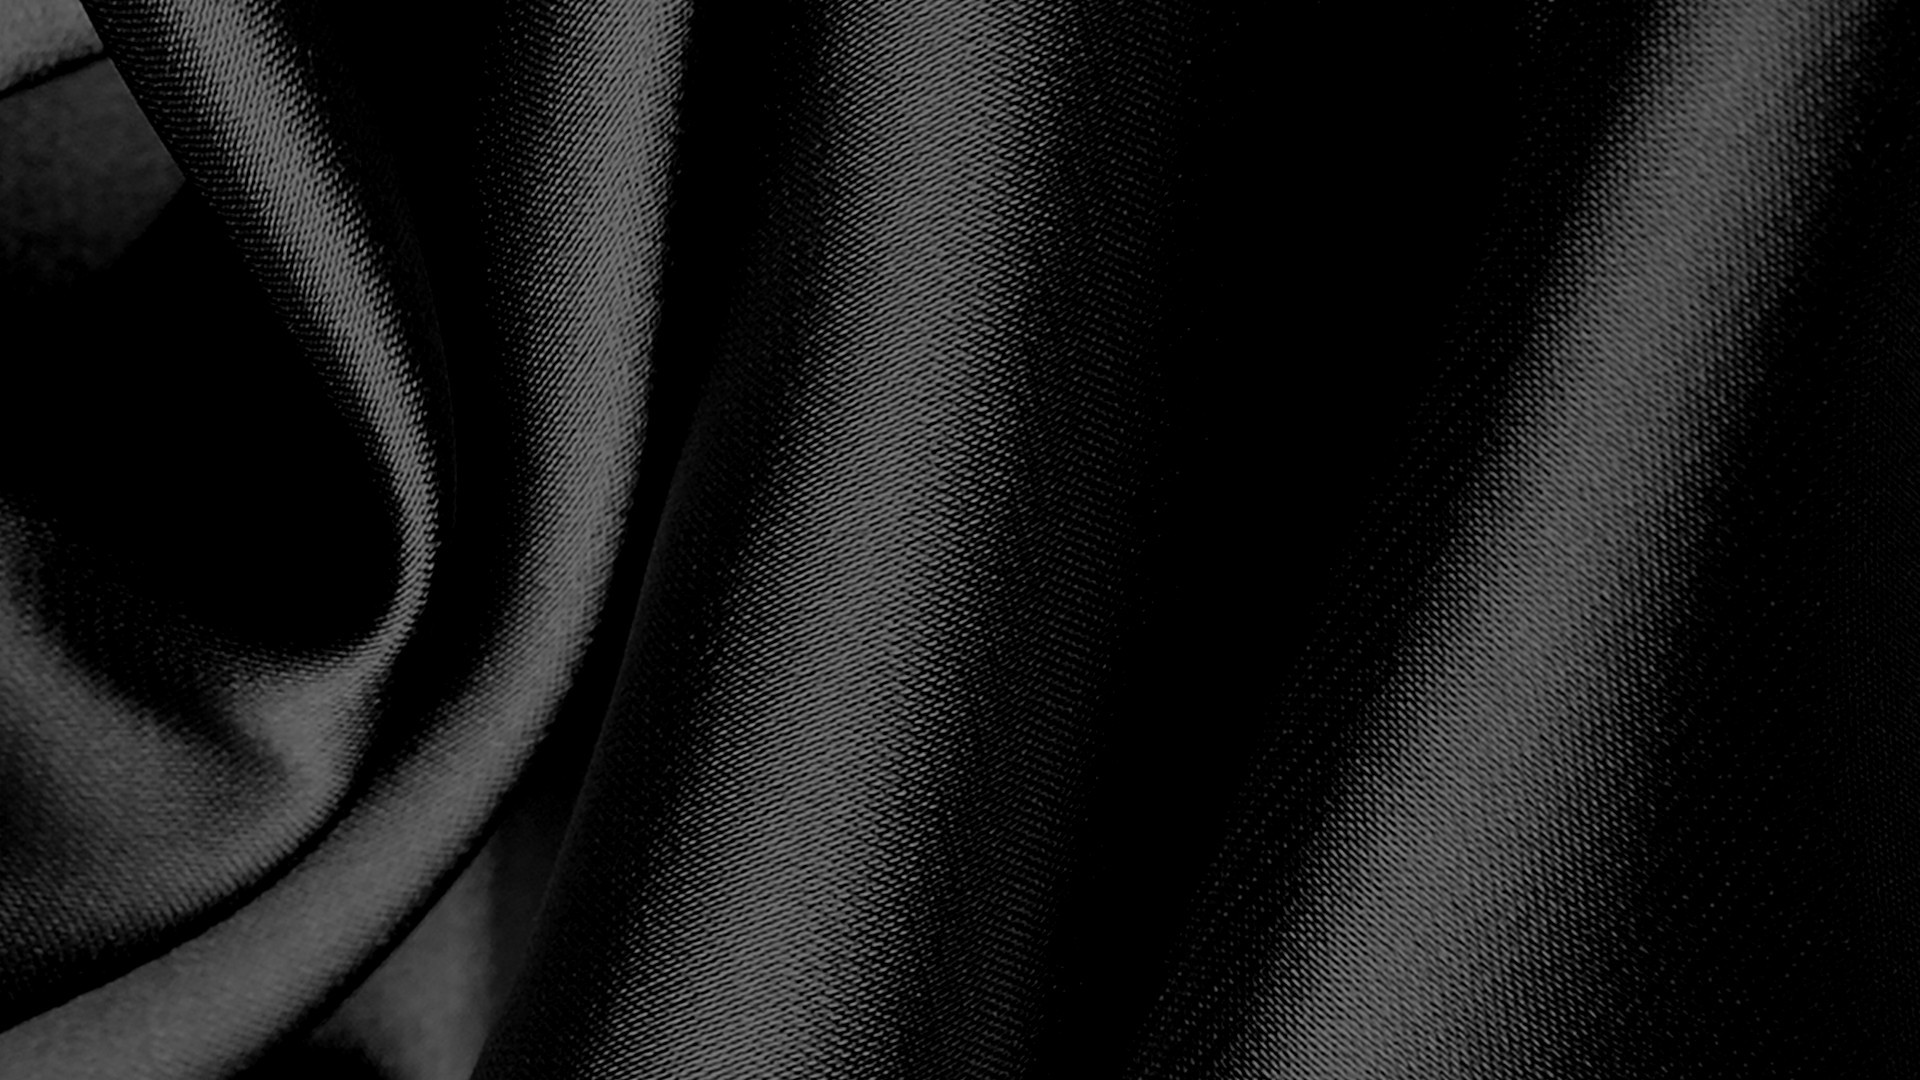 Black Silk Wallpaper With high-resolution 1920X1080 pixel. You can use this wallpaper for your Windows and Mac OS computers as well as your Android and iPhone smartphones